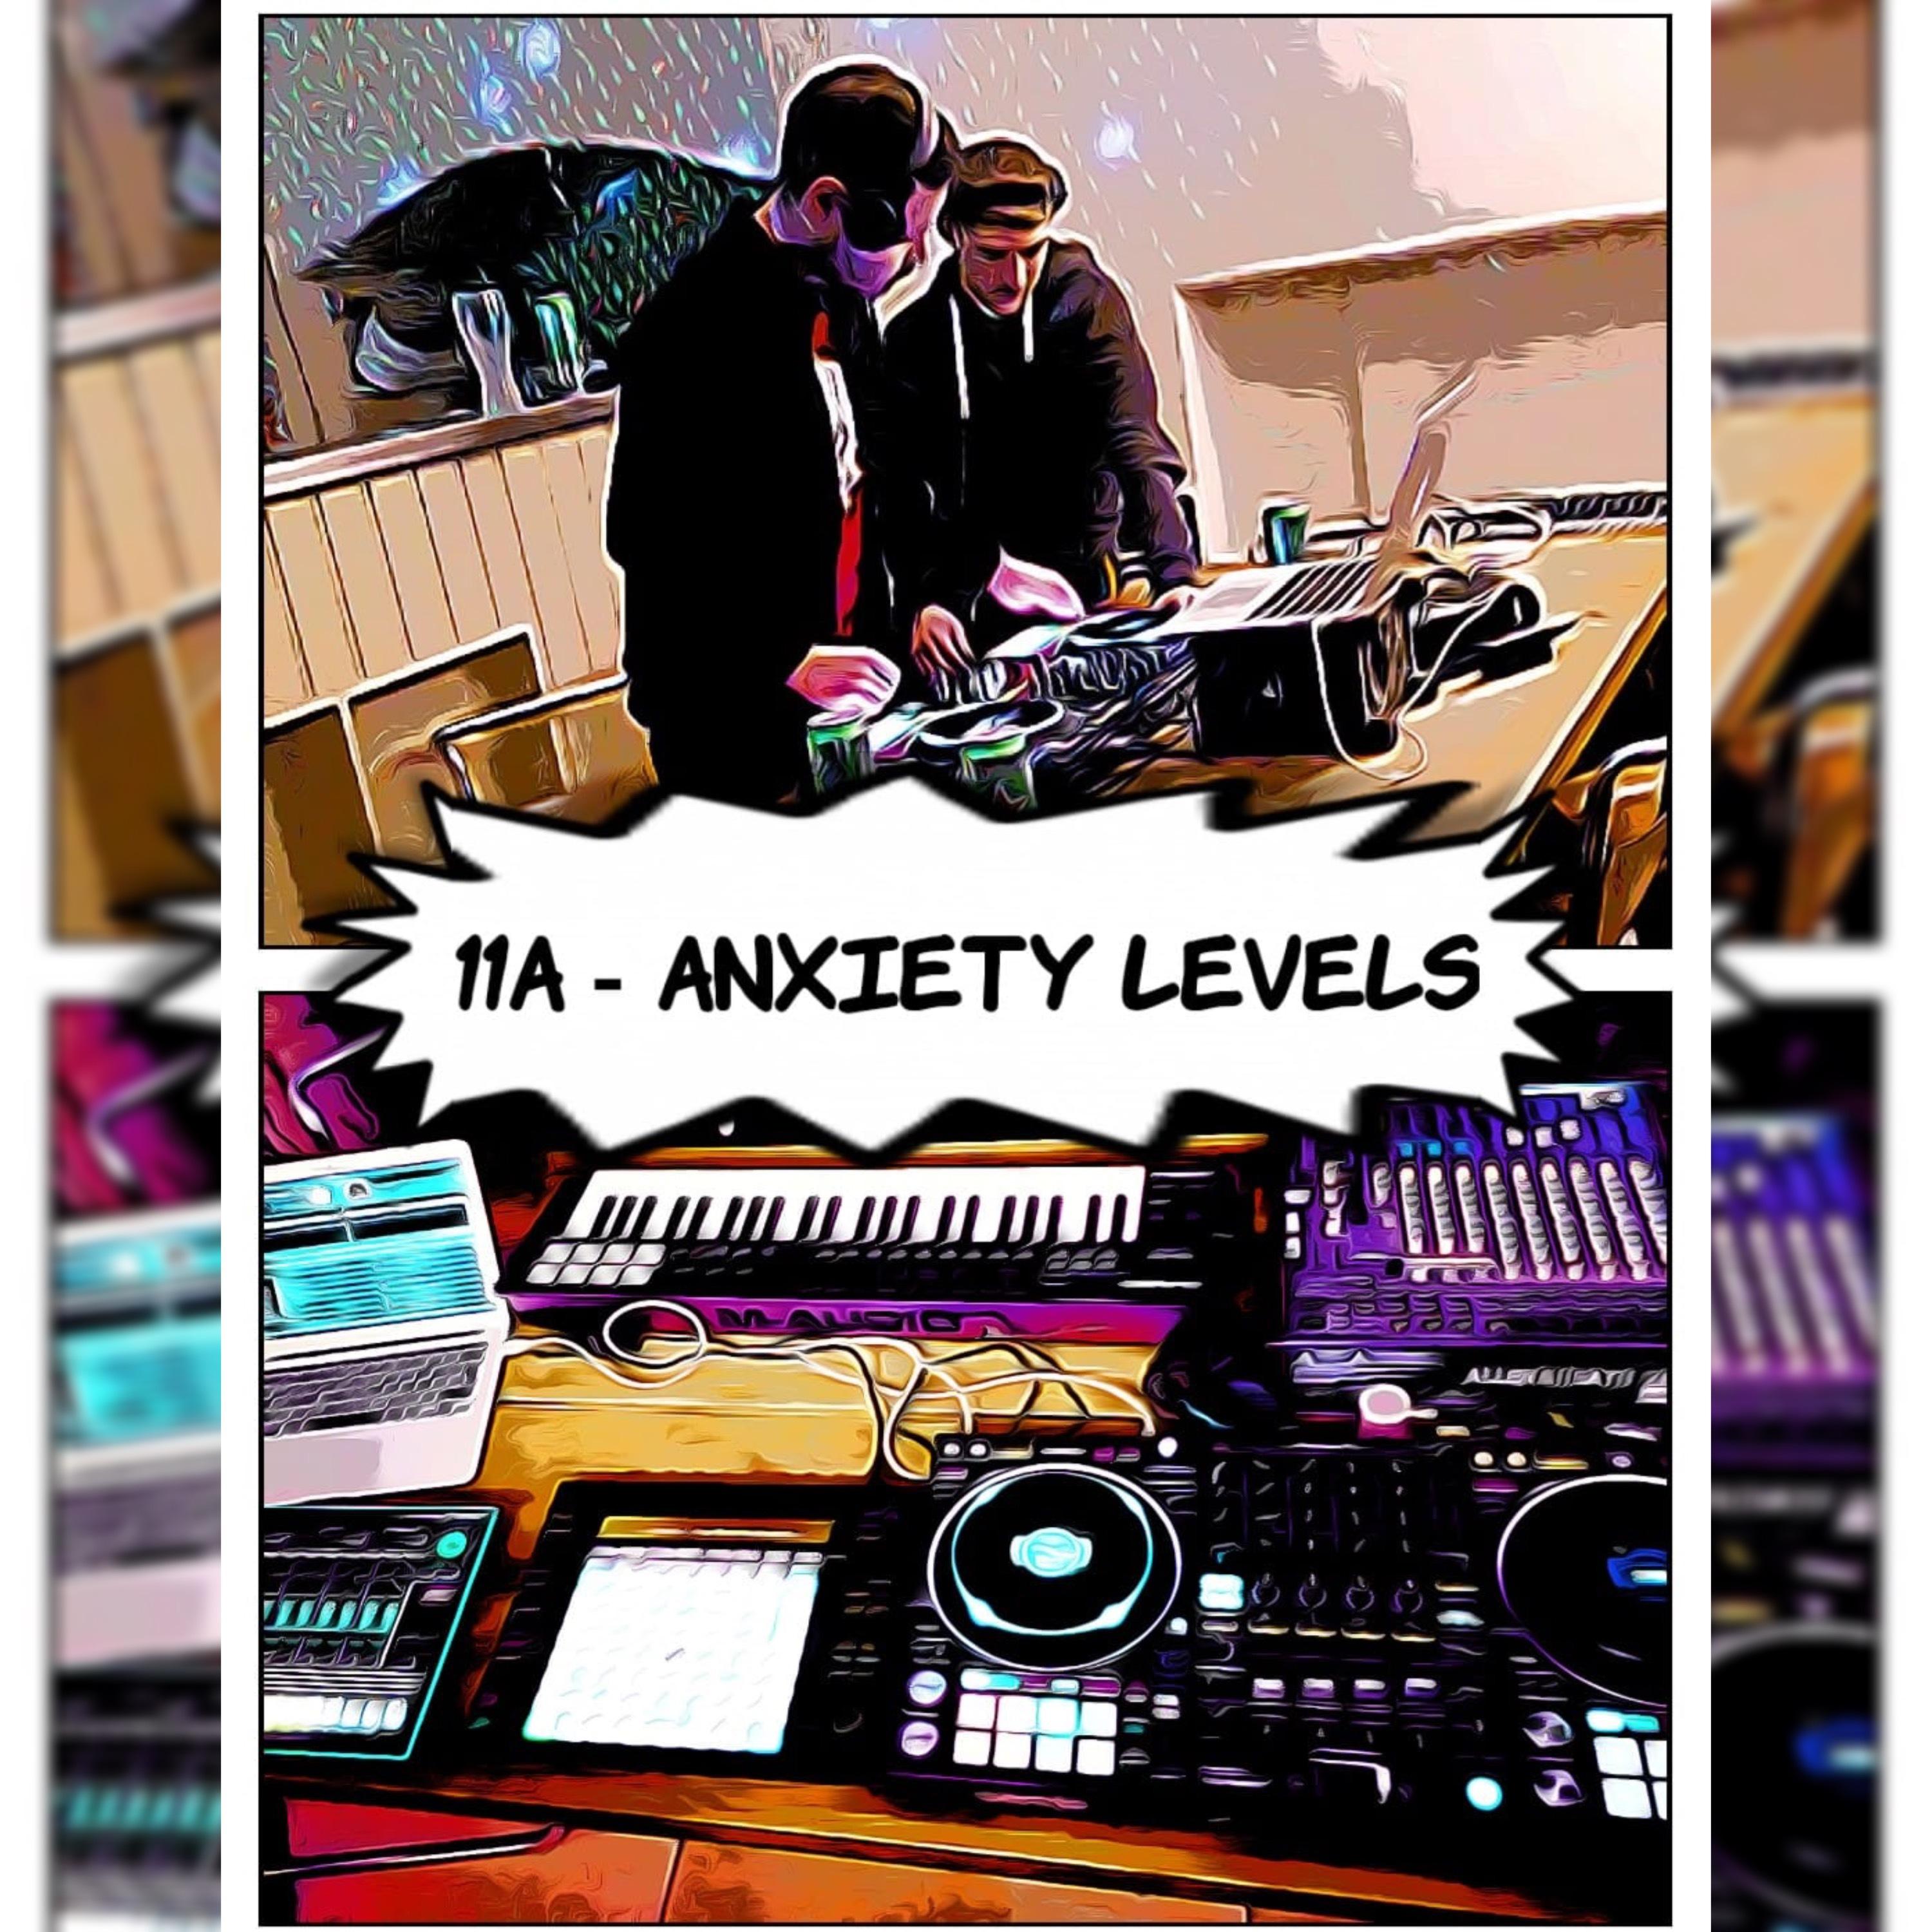 11A! - Anxiety levels